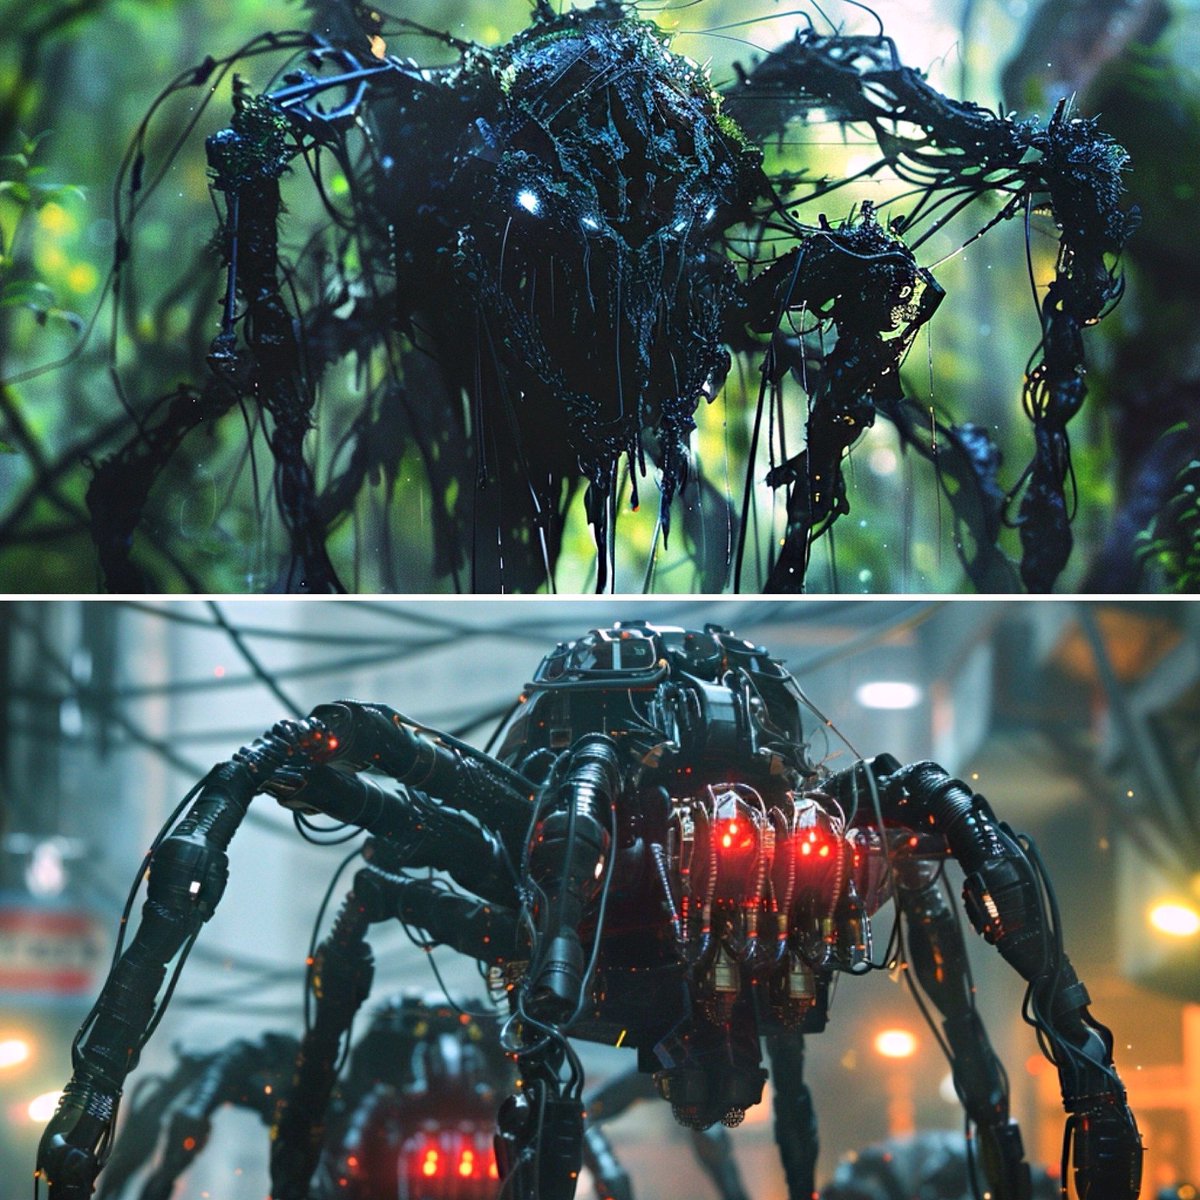 Which one would you rather encounter?

The Harbinger: a corrupted code intentionally put into the timeline to correct it. 

Arachnobots: man-made, self-learning creatures released on the population to track and find anomalies. 

#projectstarroad #stormchild #amquerying